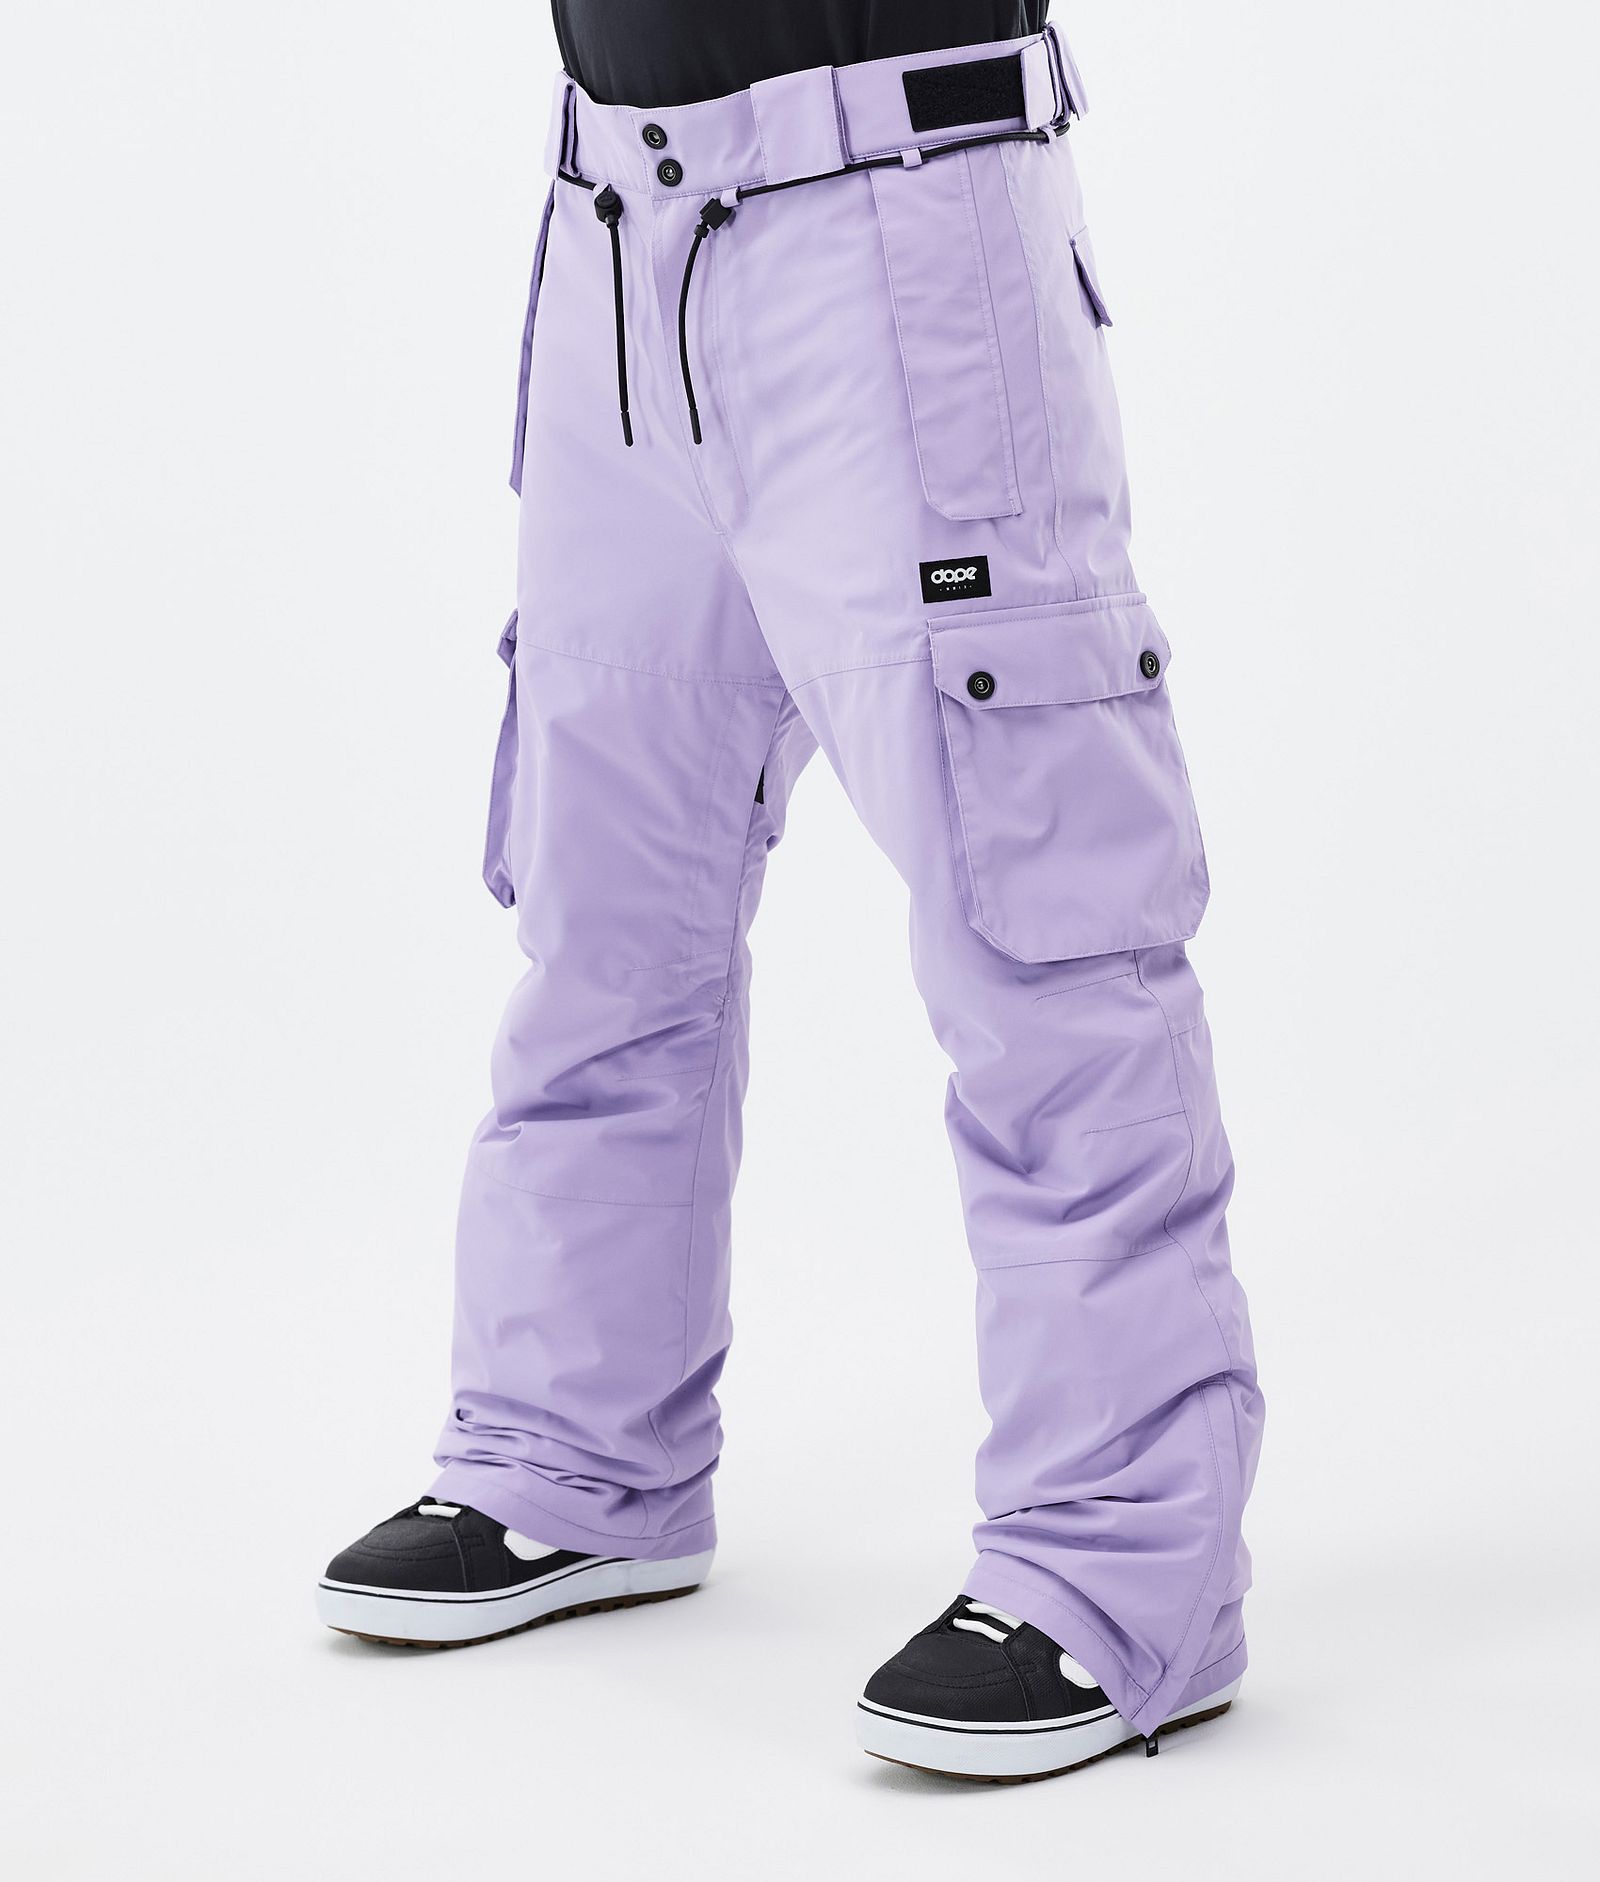 Dope Iconic Snowboard Pants Men Faded Violet Renewed, Image 1 of 7